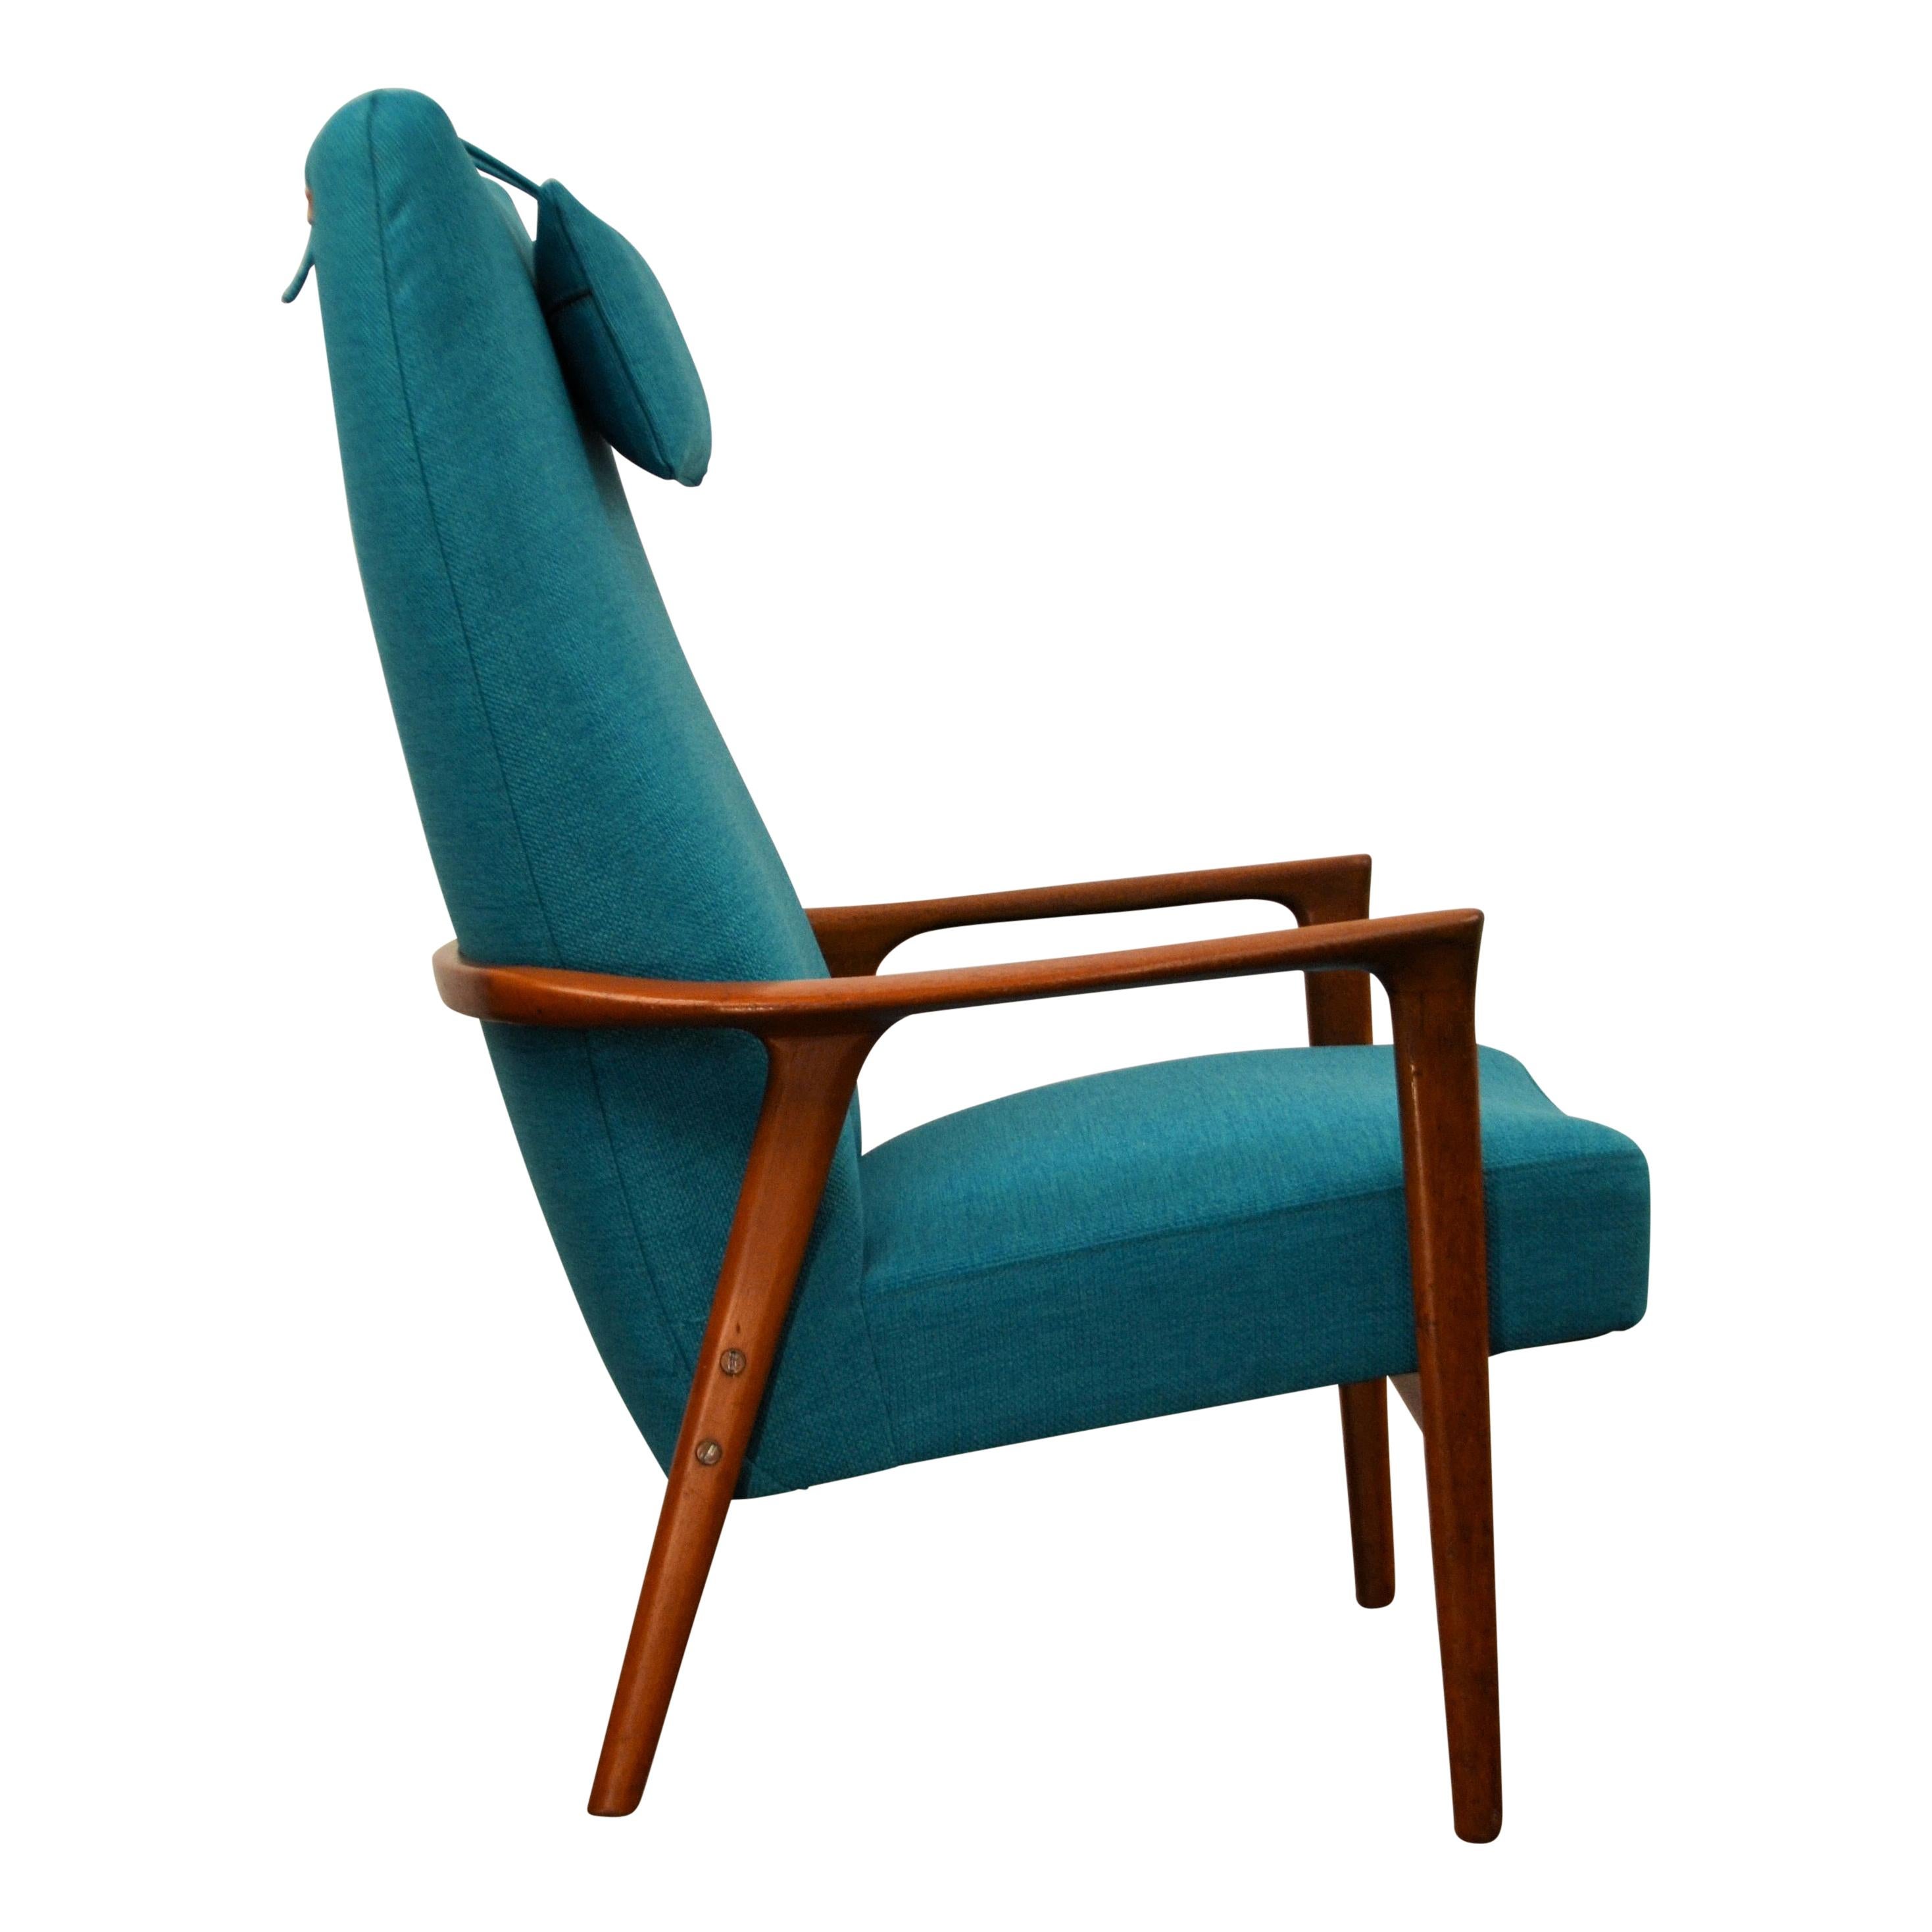 Gorgeous vintage Danish modern lounge chair designed in the 1960s by Bröderna Andersson, Sweden. This model “Peter” features the typical clear, comfortable lines Scandinavian design has become famous for, a solid teak frame and new quality